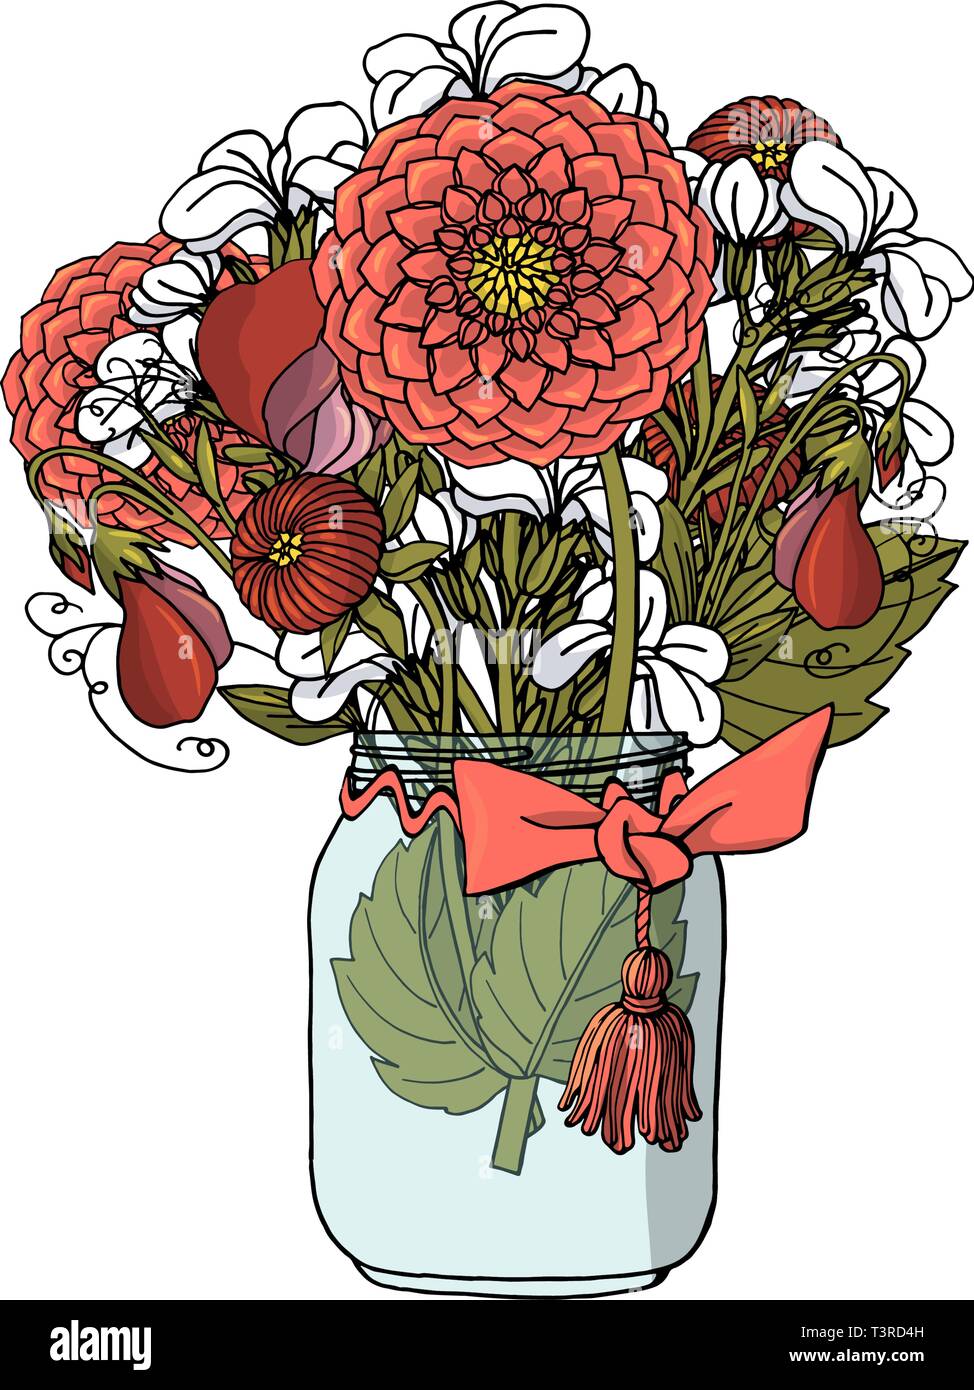 Hand drawn doodle style bouquets of different flowers: dahlia; stock flower, sweet pea. Stock Vector